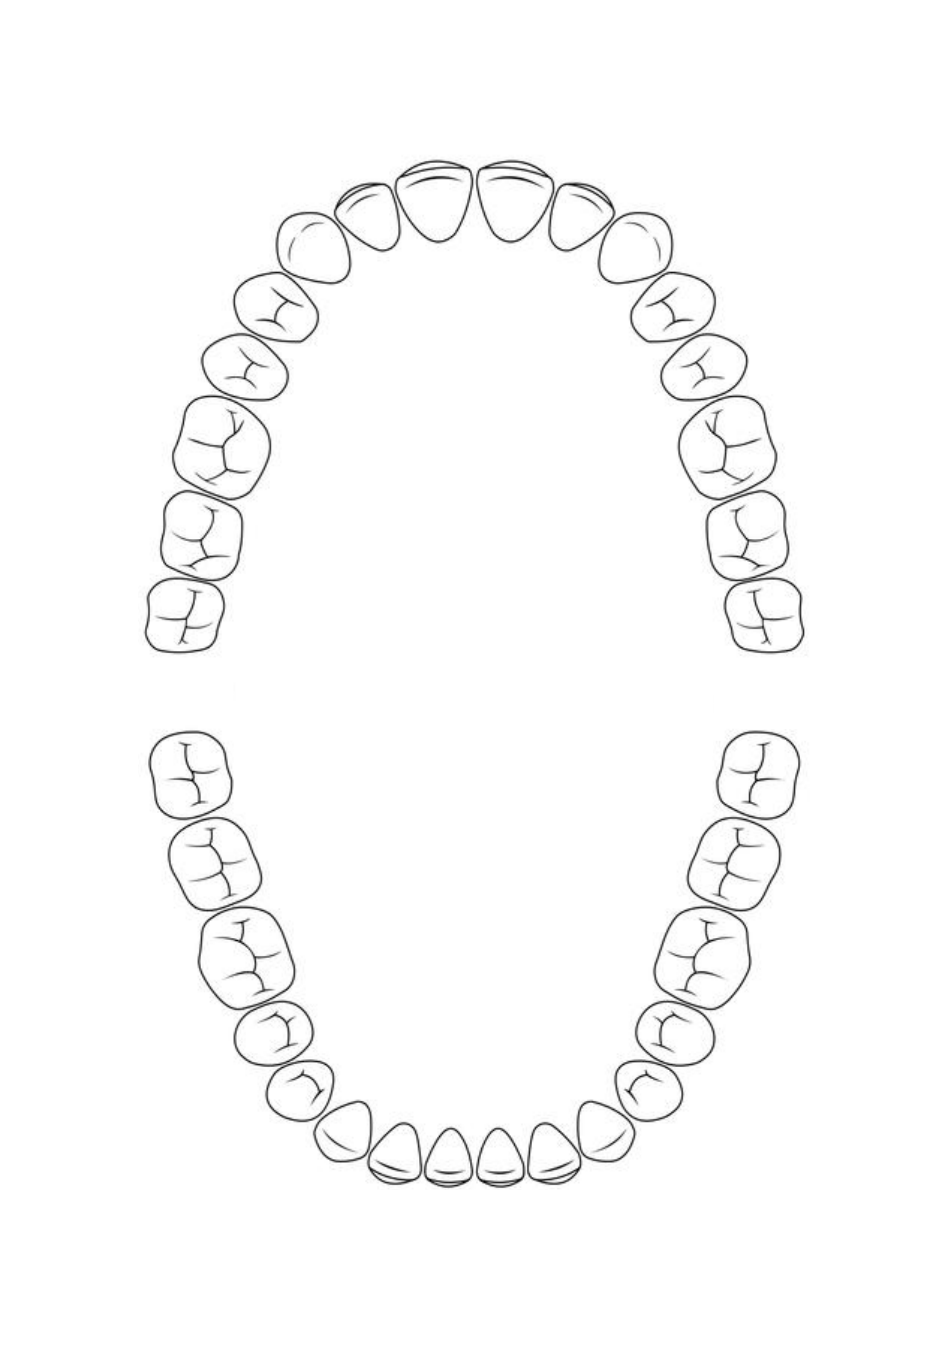 blank-tooth-chart-download-printable-pdf-templateroller